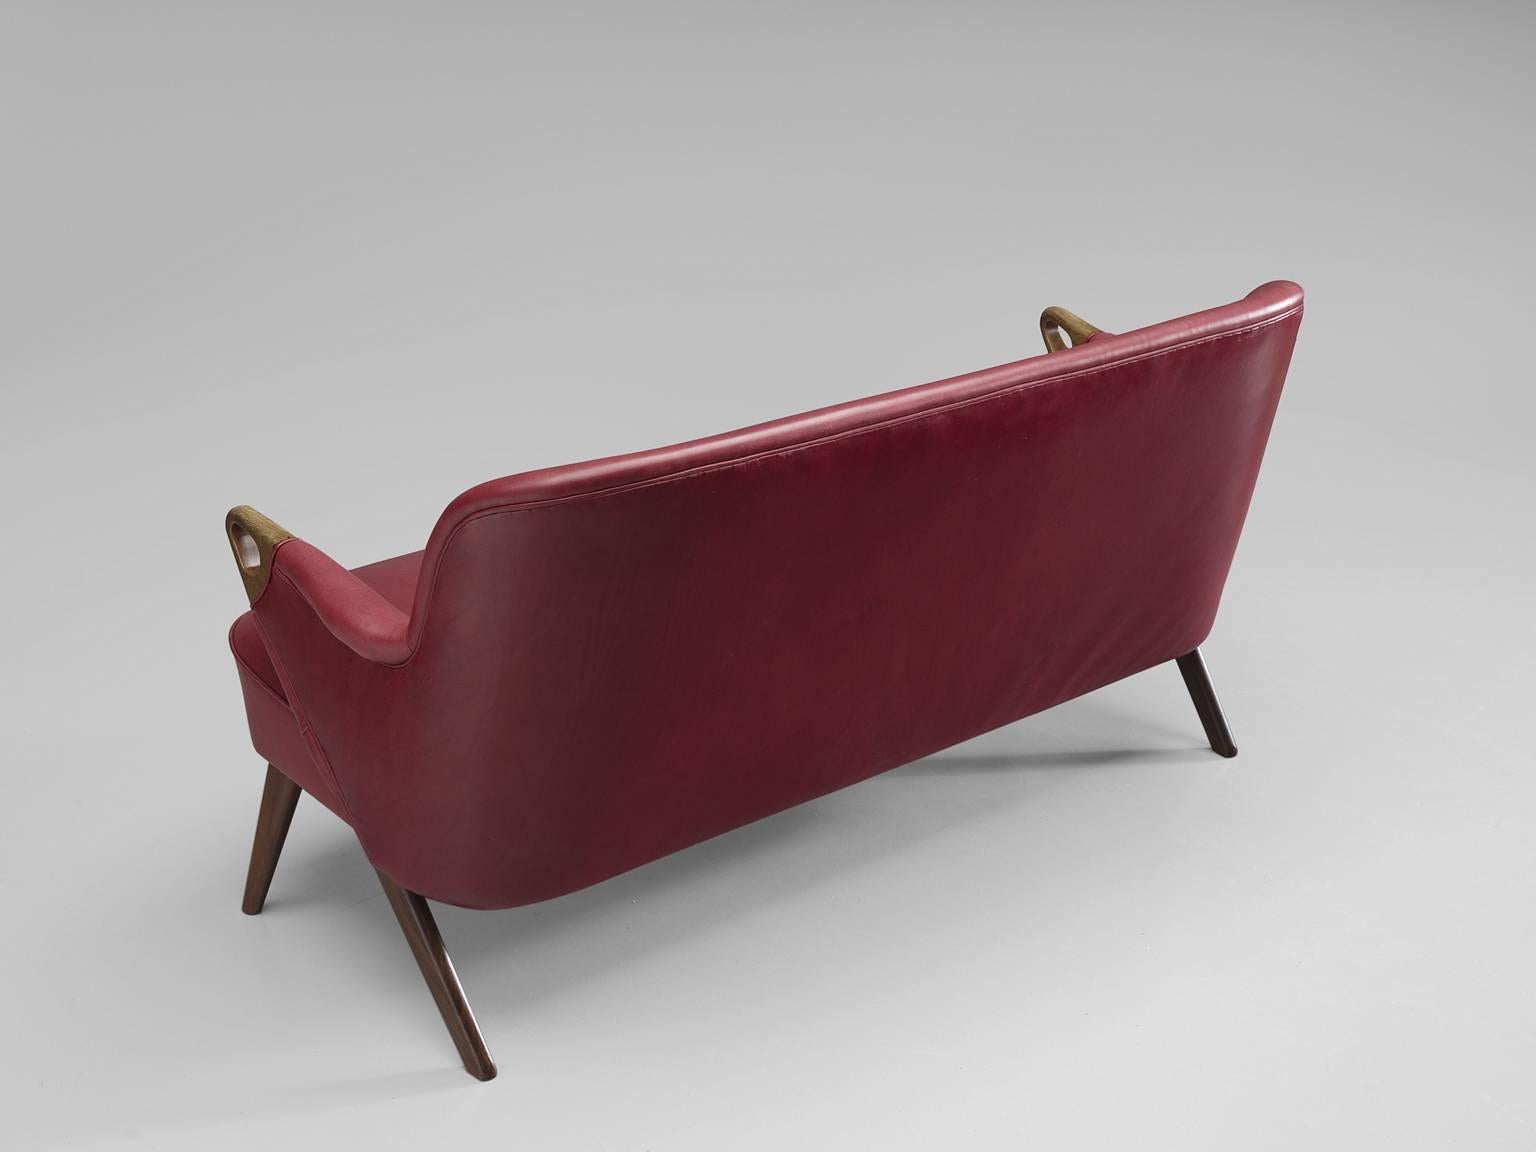 Mid-20th Century Danish Settee in Berry Red Leather and Teak